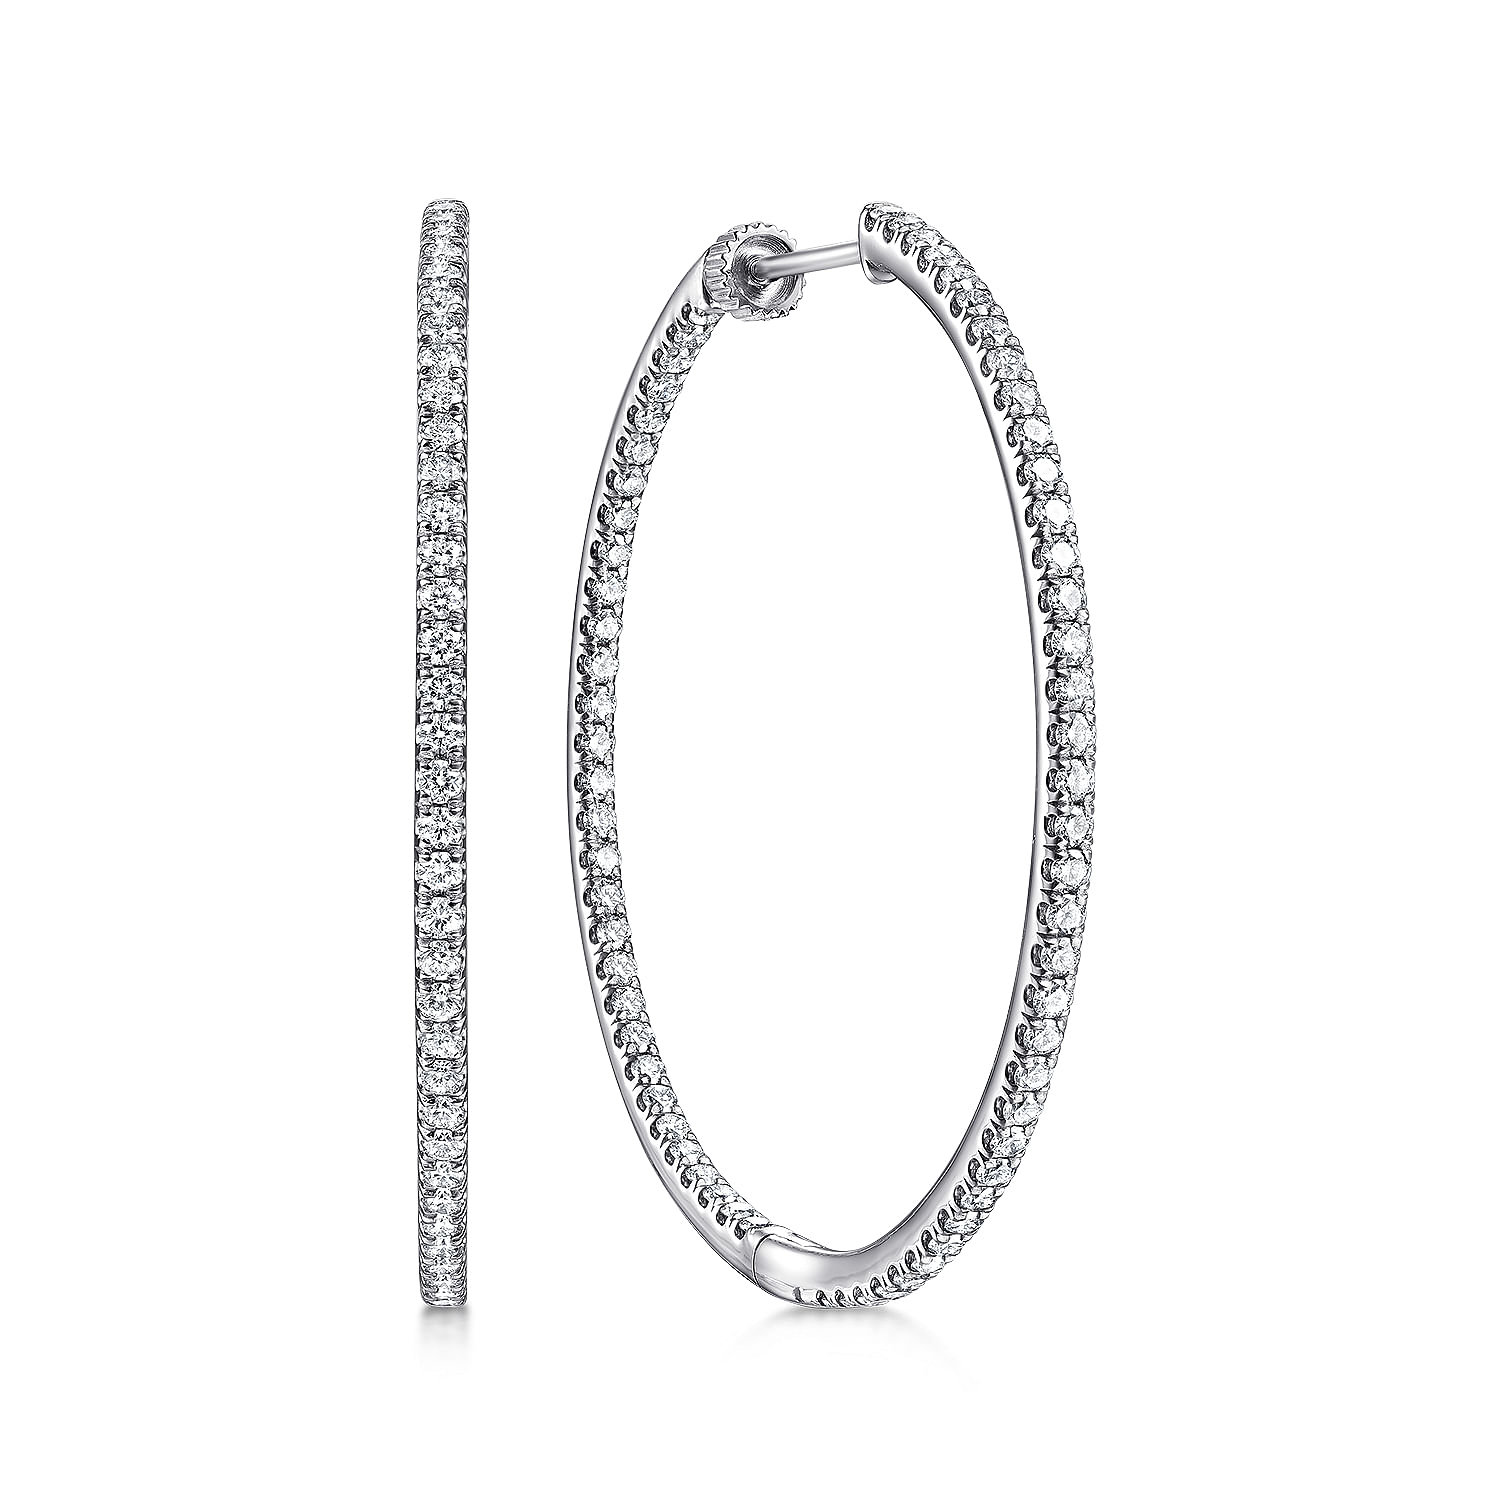 Gabriel - 14K White Gold French Pavé 40mm Round Inside Out Diamond Hoop Earrings